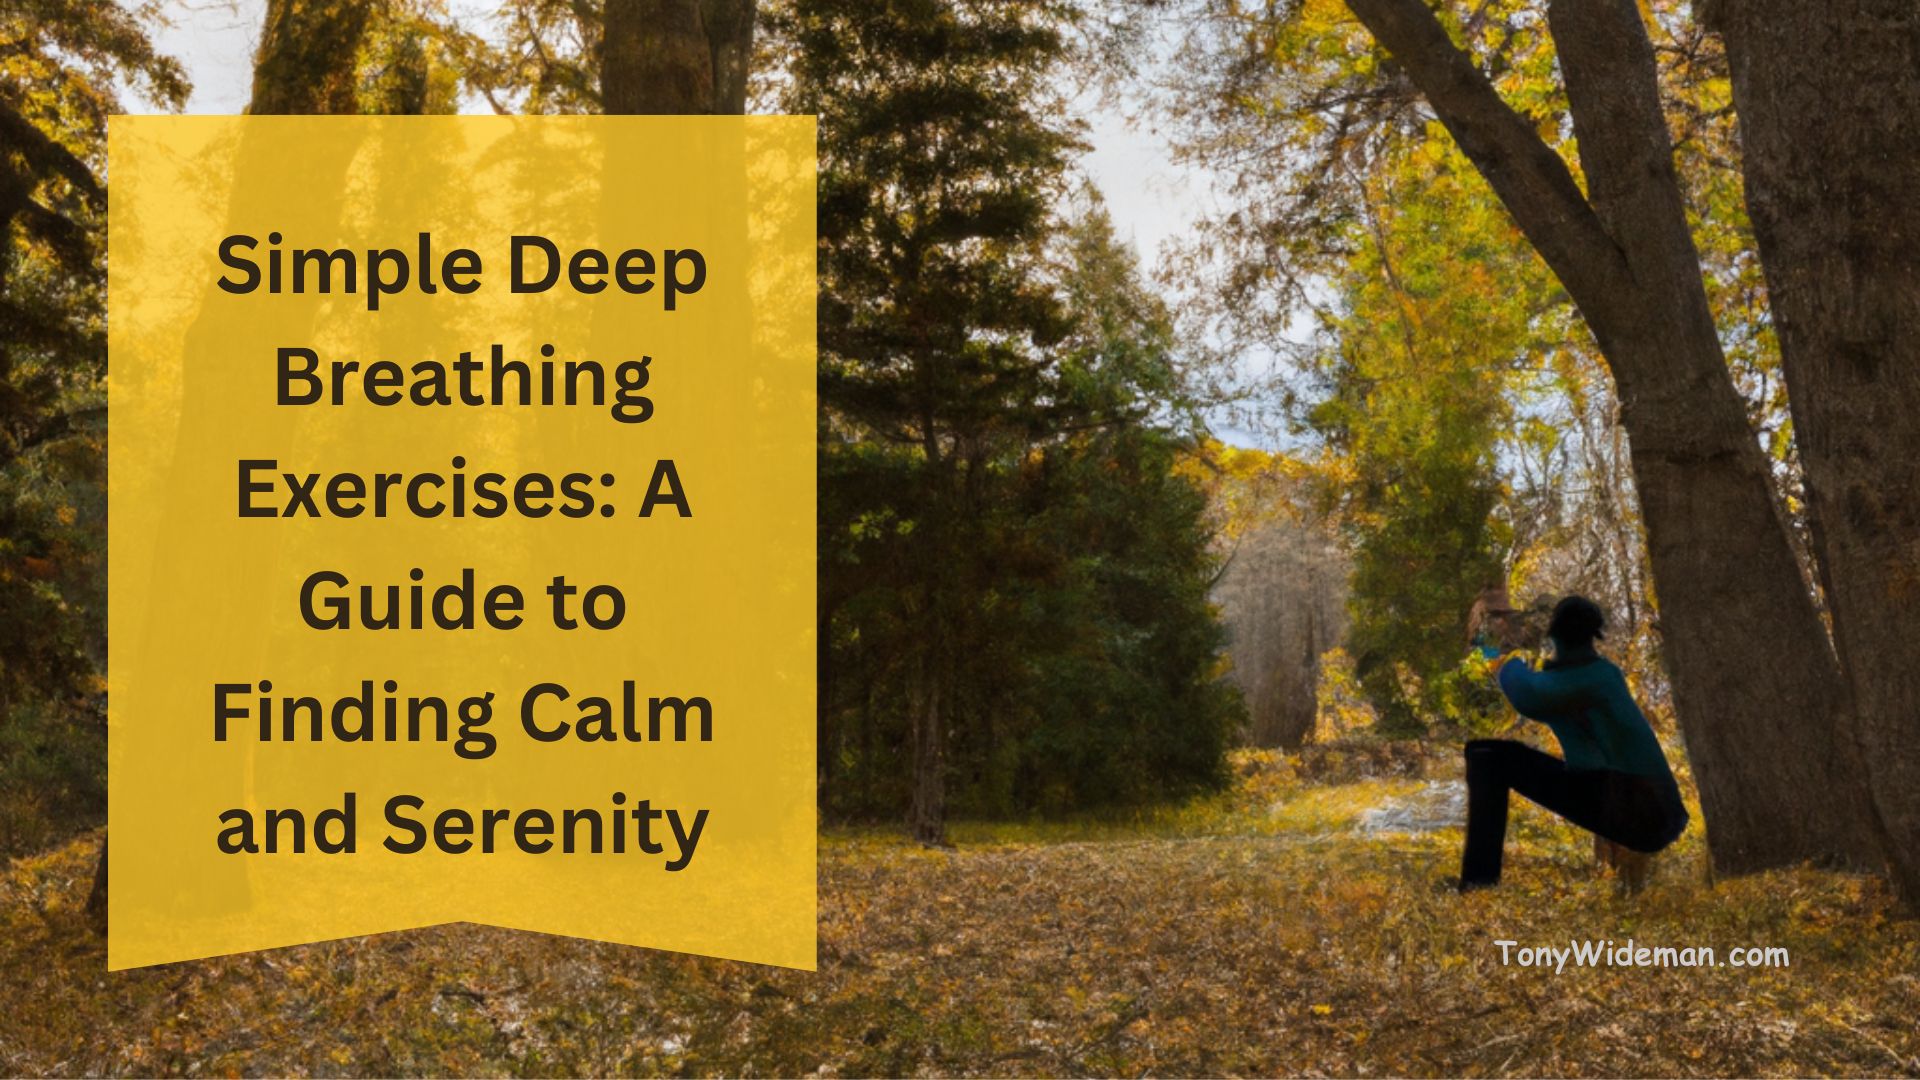 Simple Deep Breathing Exercises: A Guide to Finding Calm and Serenity